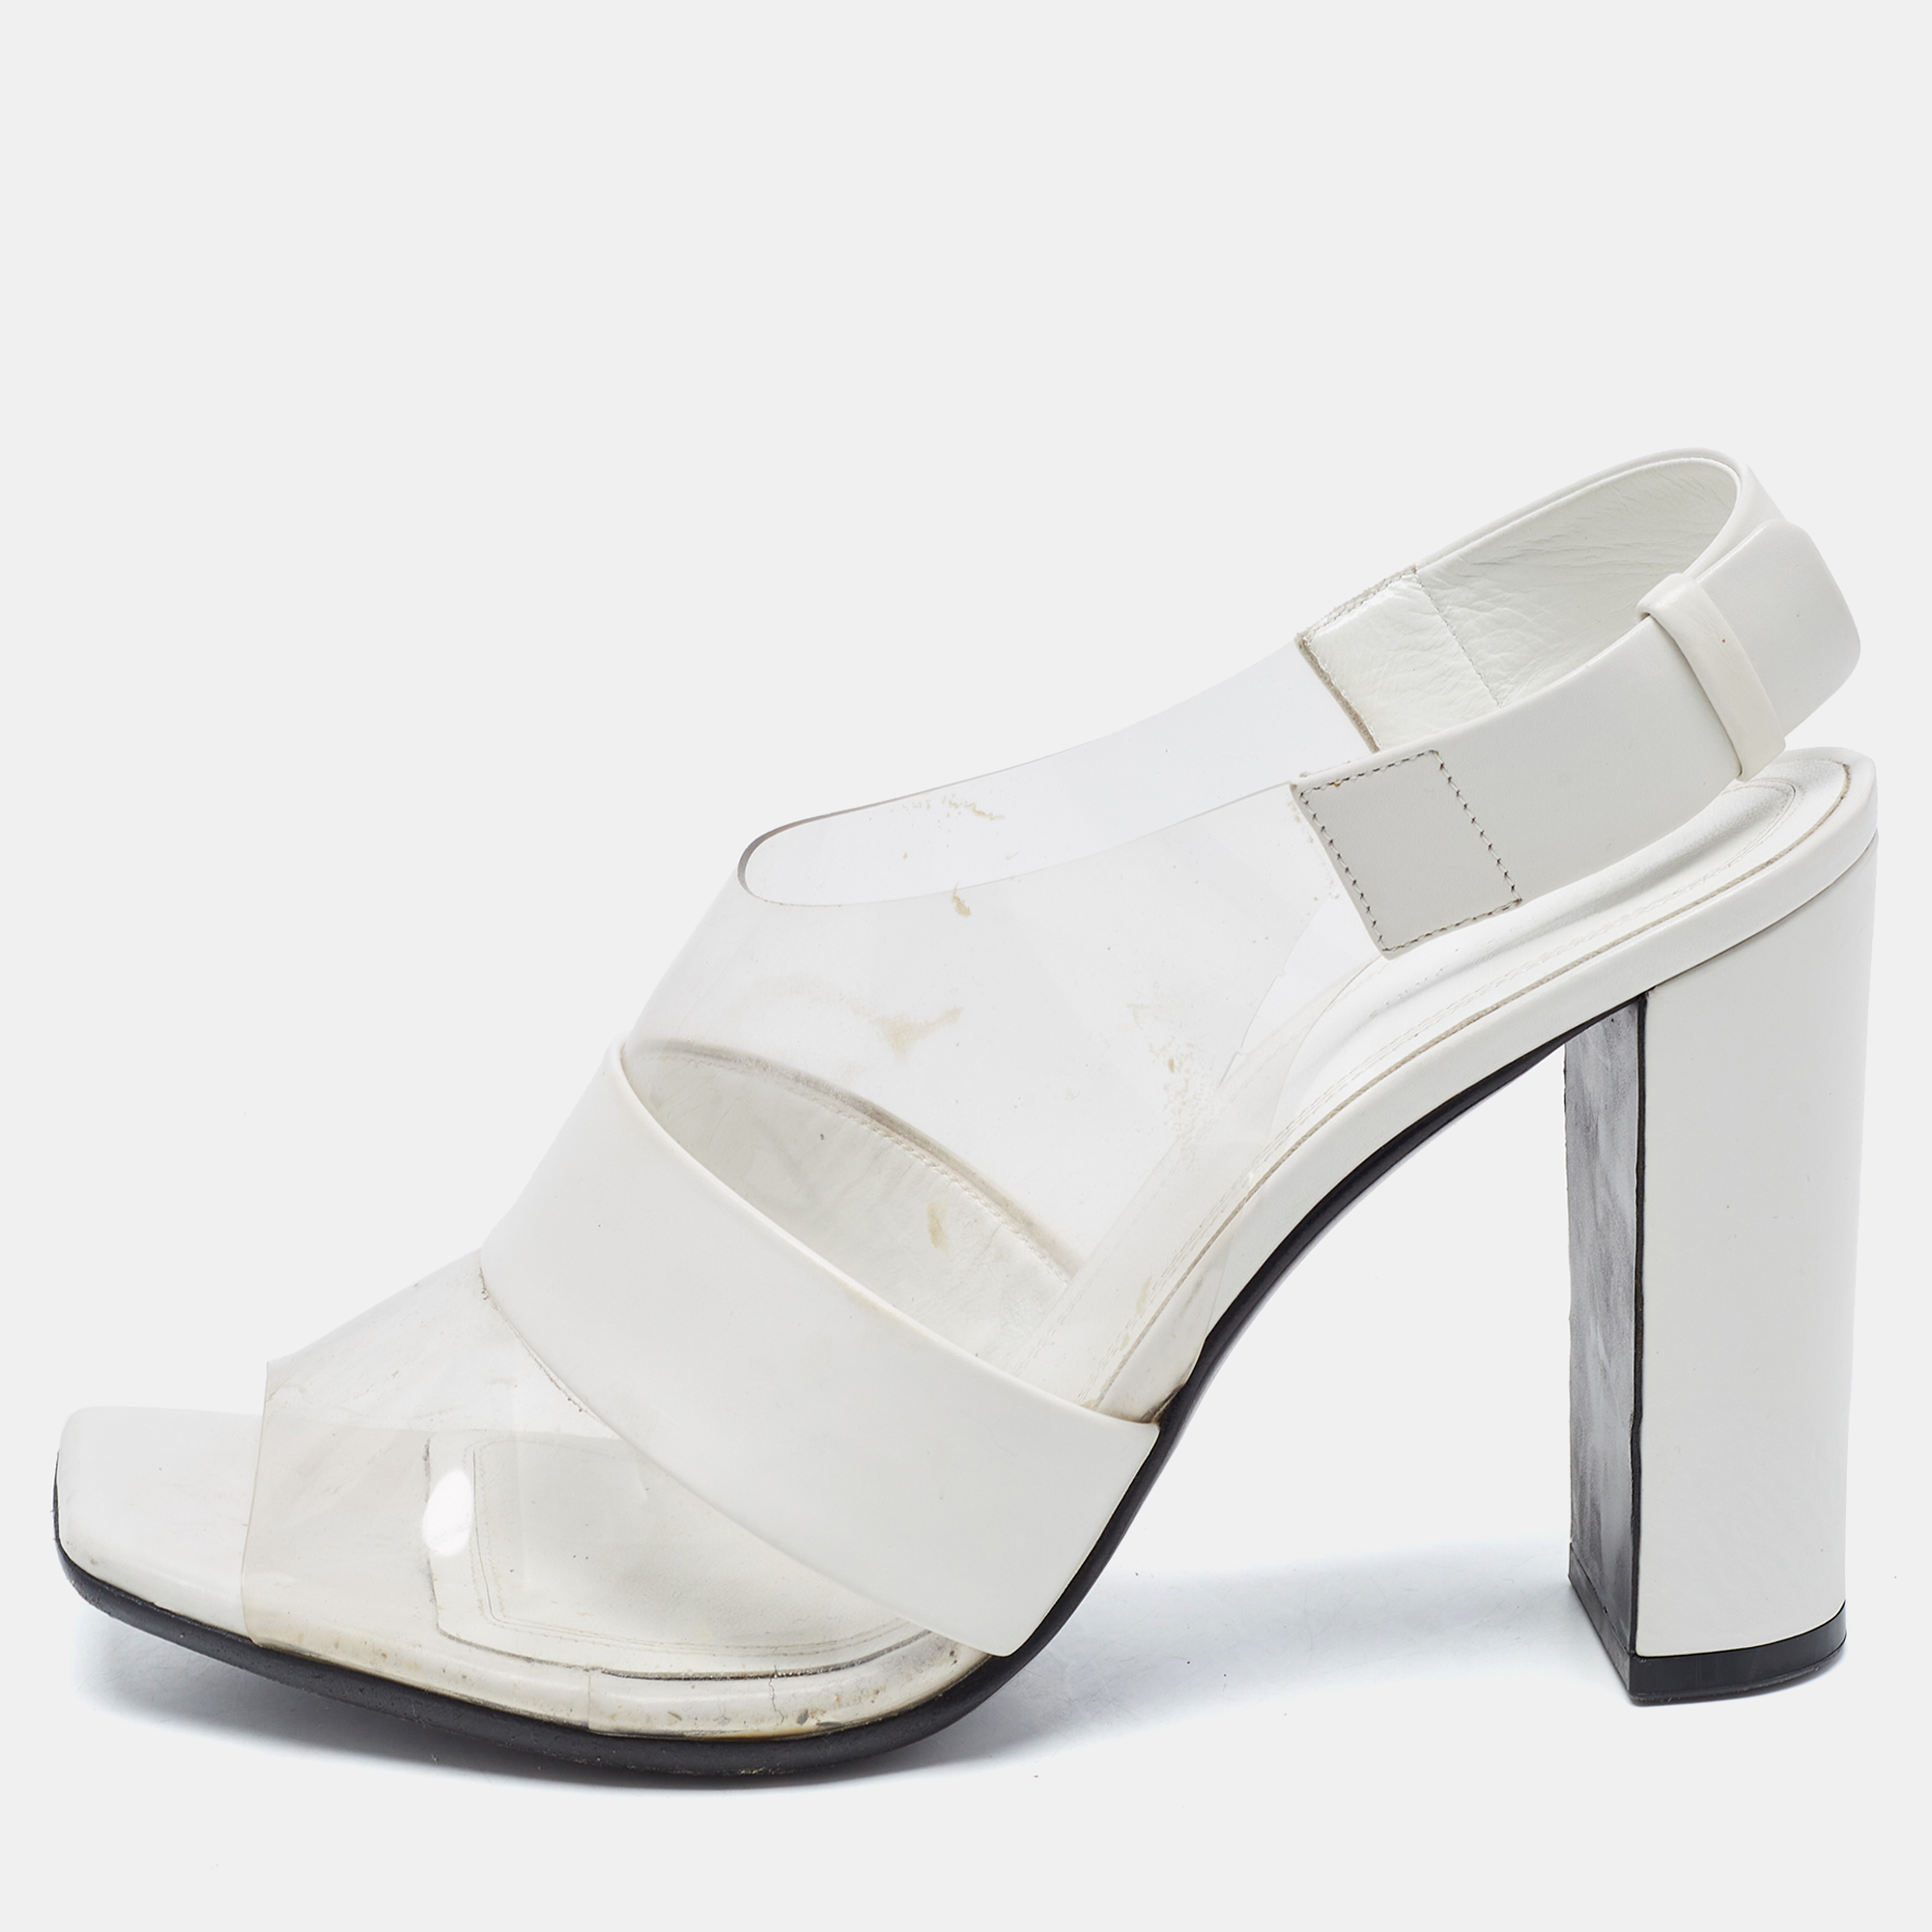 Celine White Leather And PVC Slingback Sandals Size 38